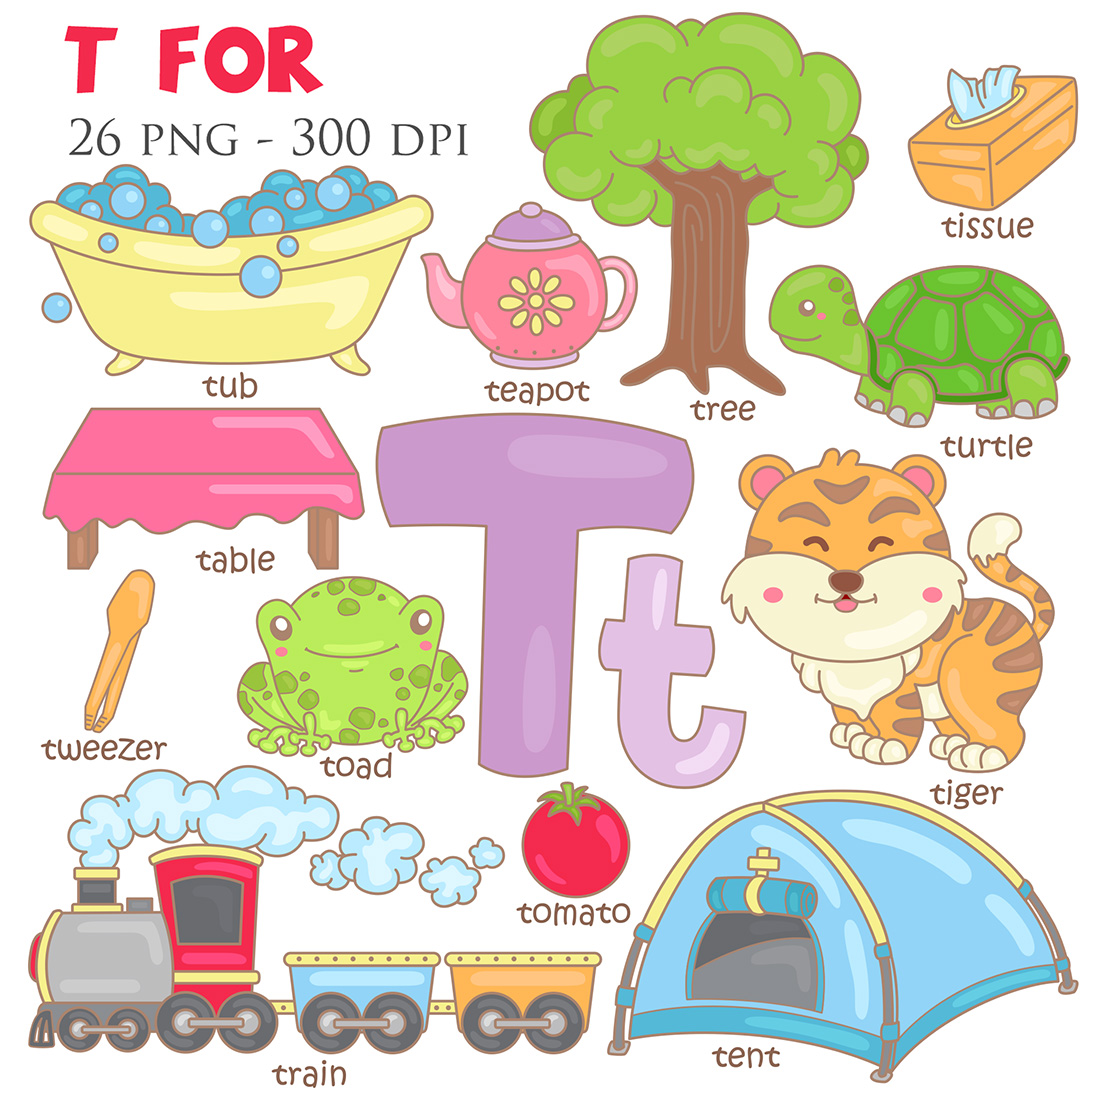 Alphabet T For Vocabulary School Letter Reading Writing Font Study Learning Student Toodler Kids Cartoon Lesson Tomato Tent Tub Tissue Turtle Train Tree Teapot Tiger Tweezer Table Toad Illustration Vector Clipart Cartoon cover image.